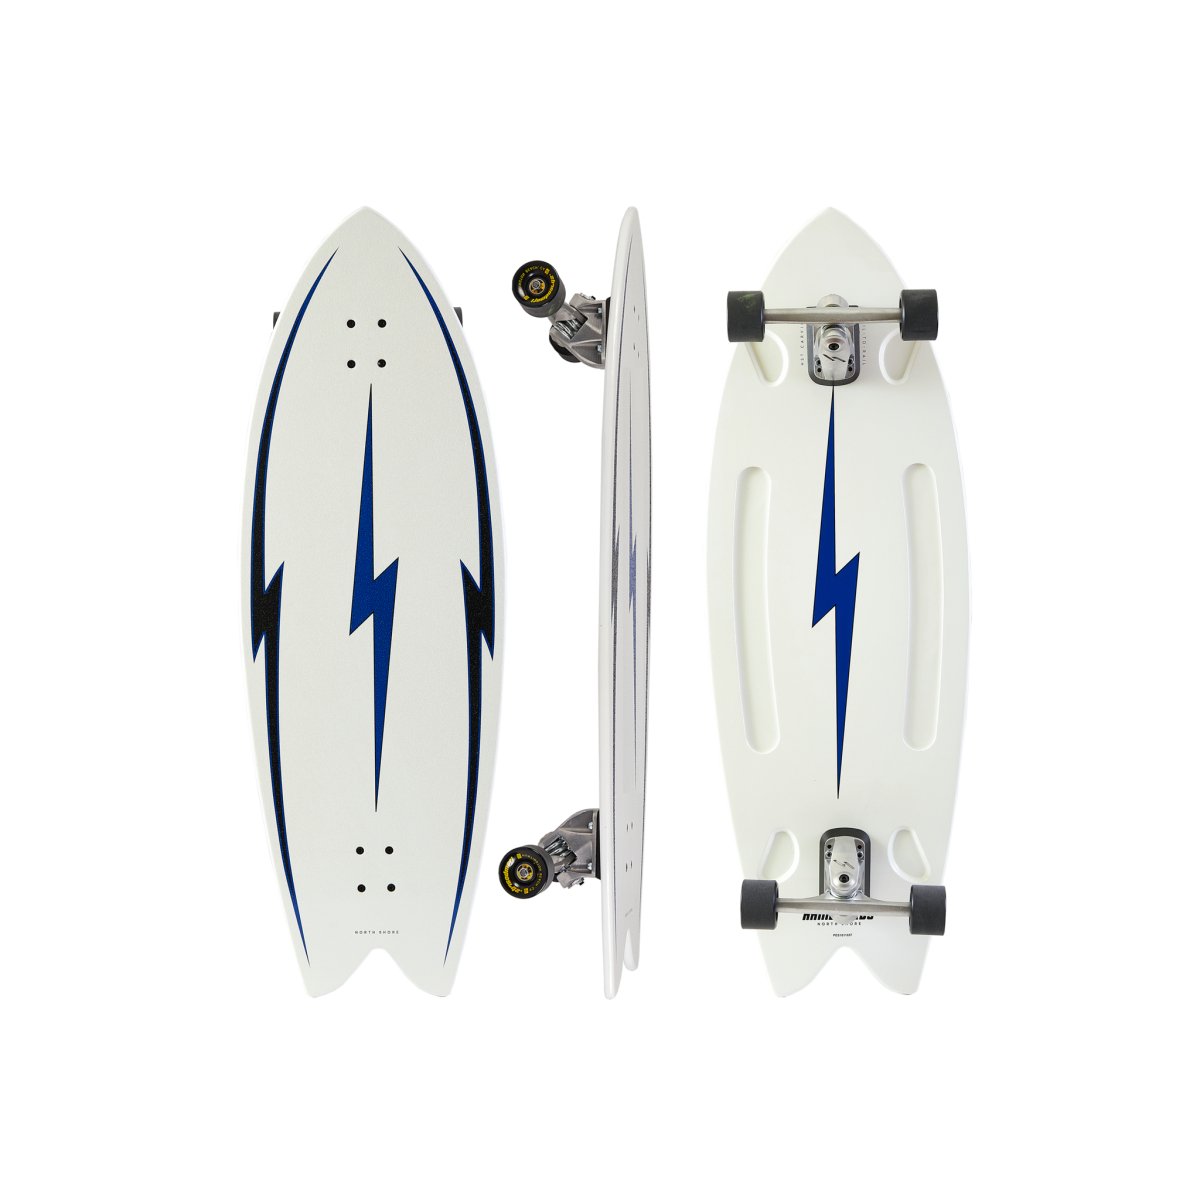 Hamboard Pescadito - Surfskate - North Shore White - 43" - HST200 - Surfskate - Completes